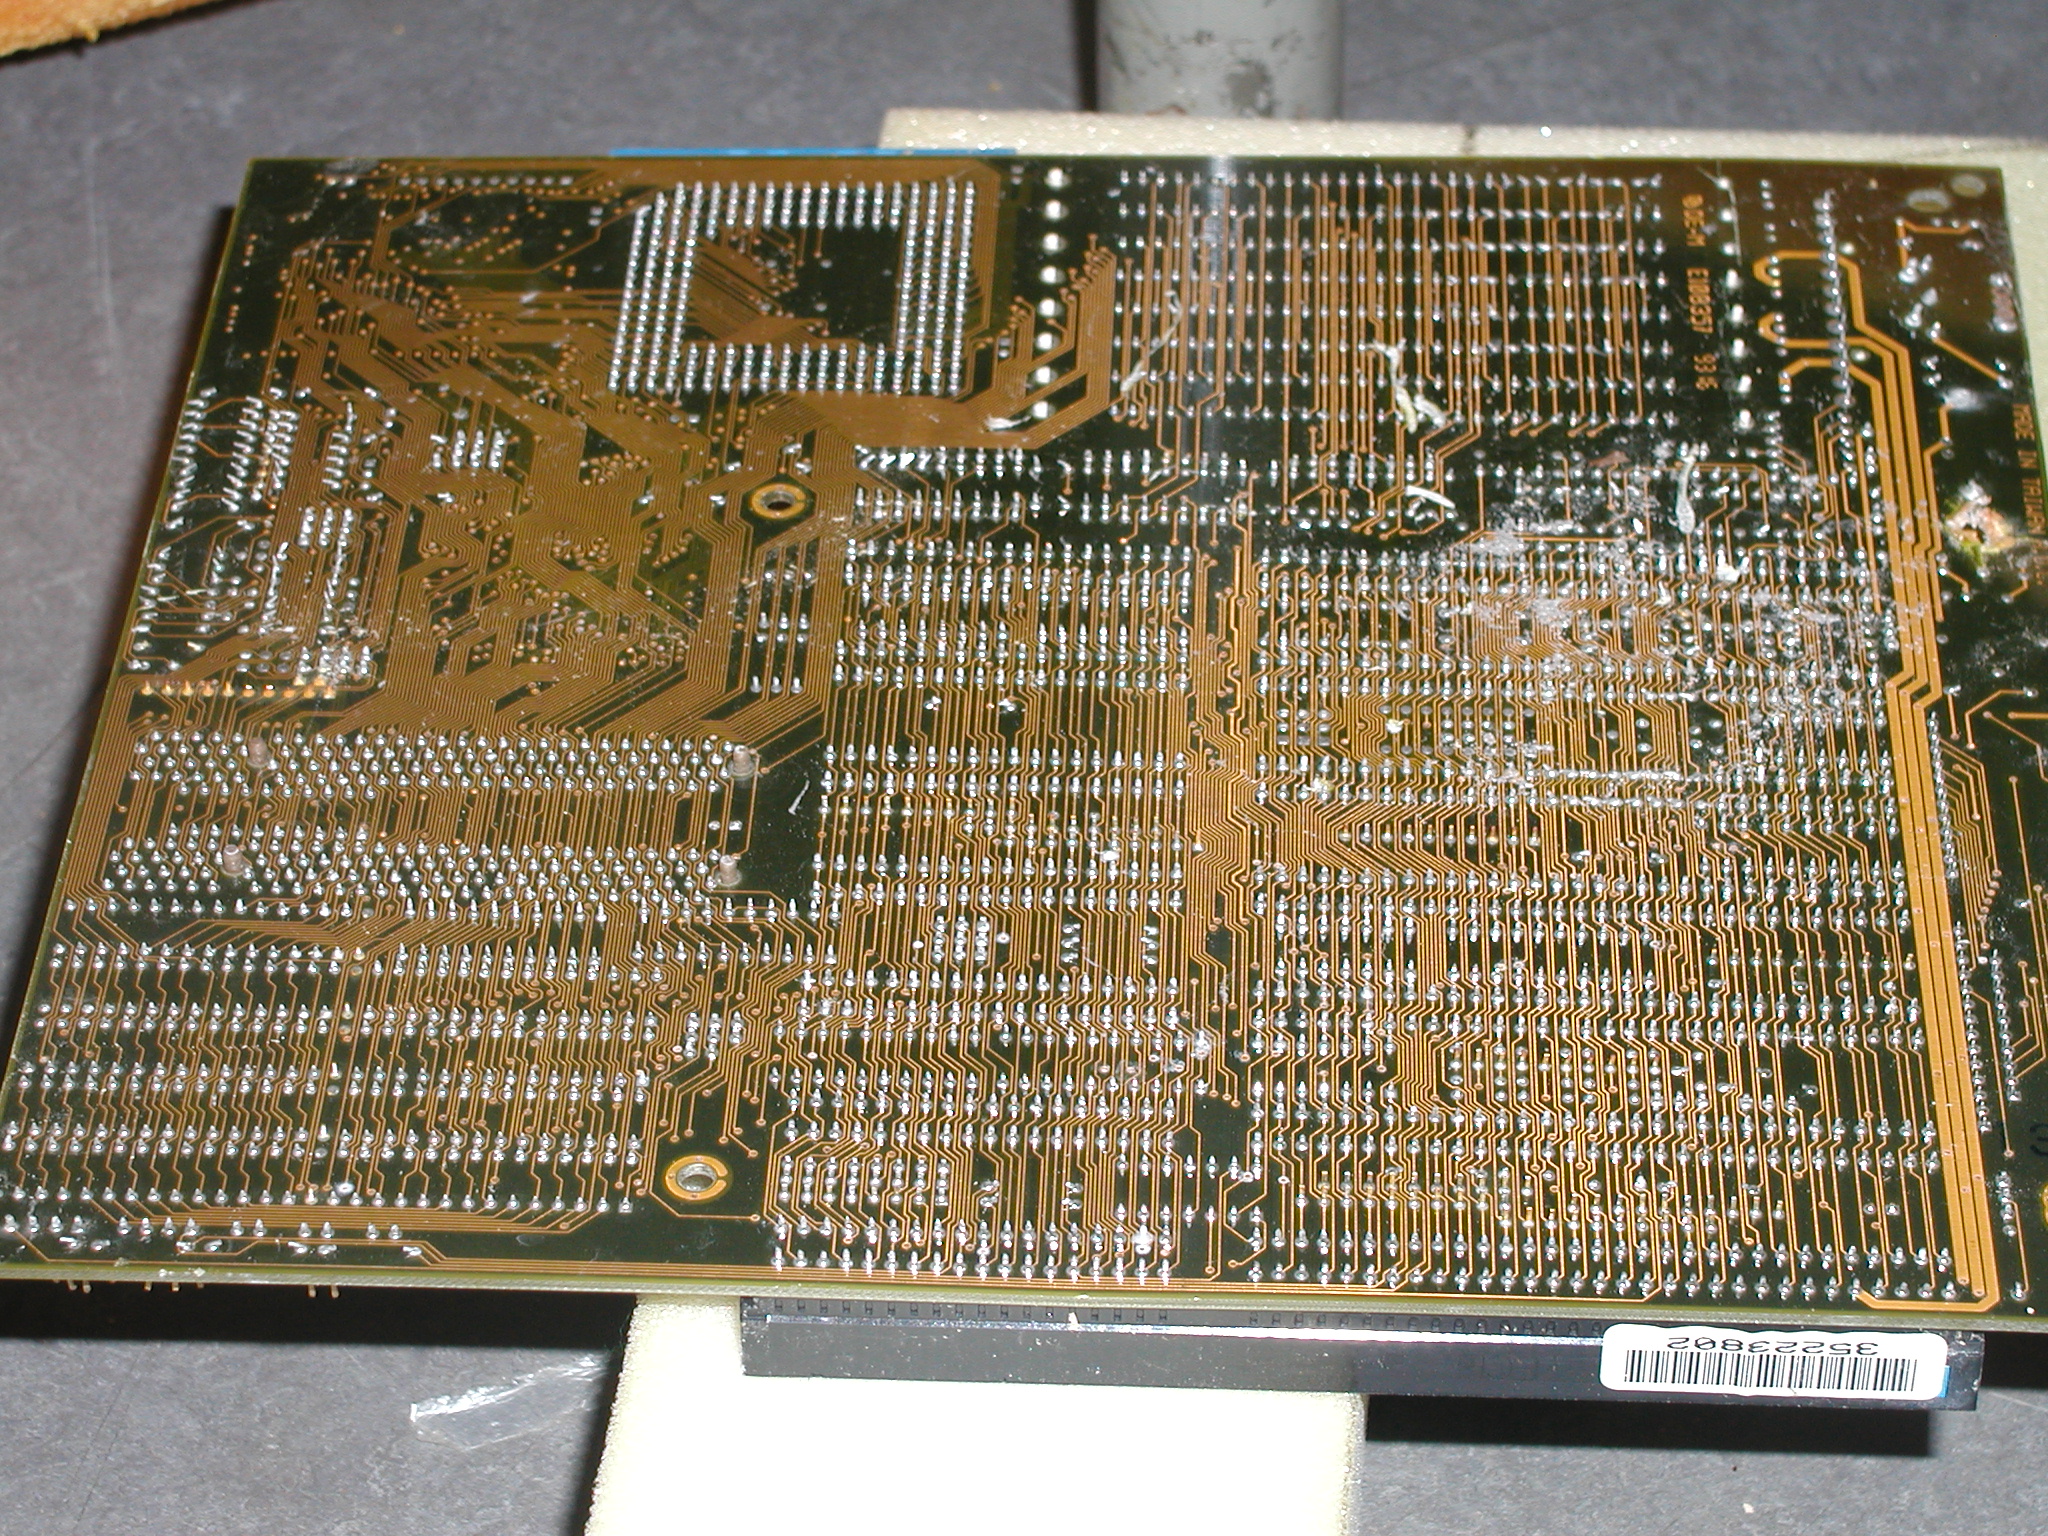 tabus objects circuits motherboard circuitboard computer solder sodered